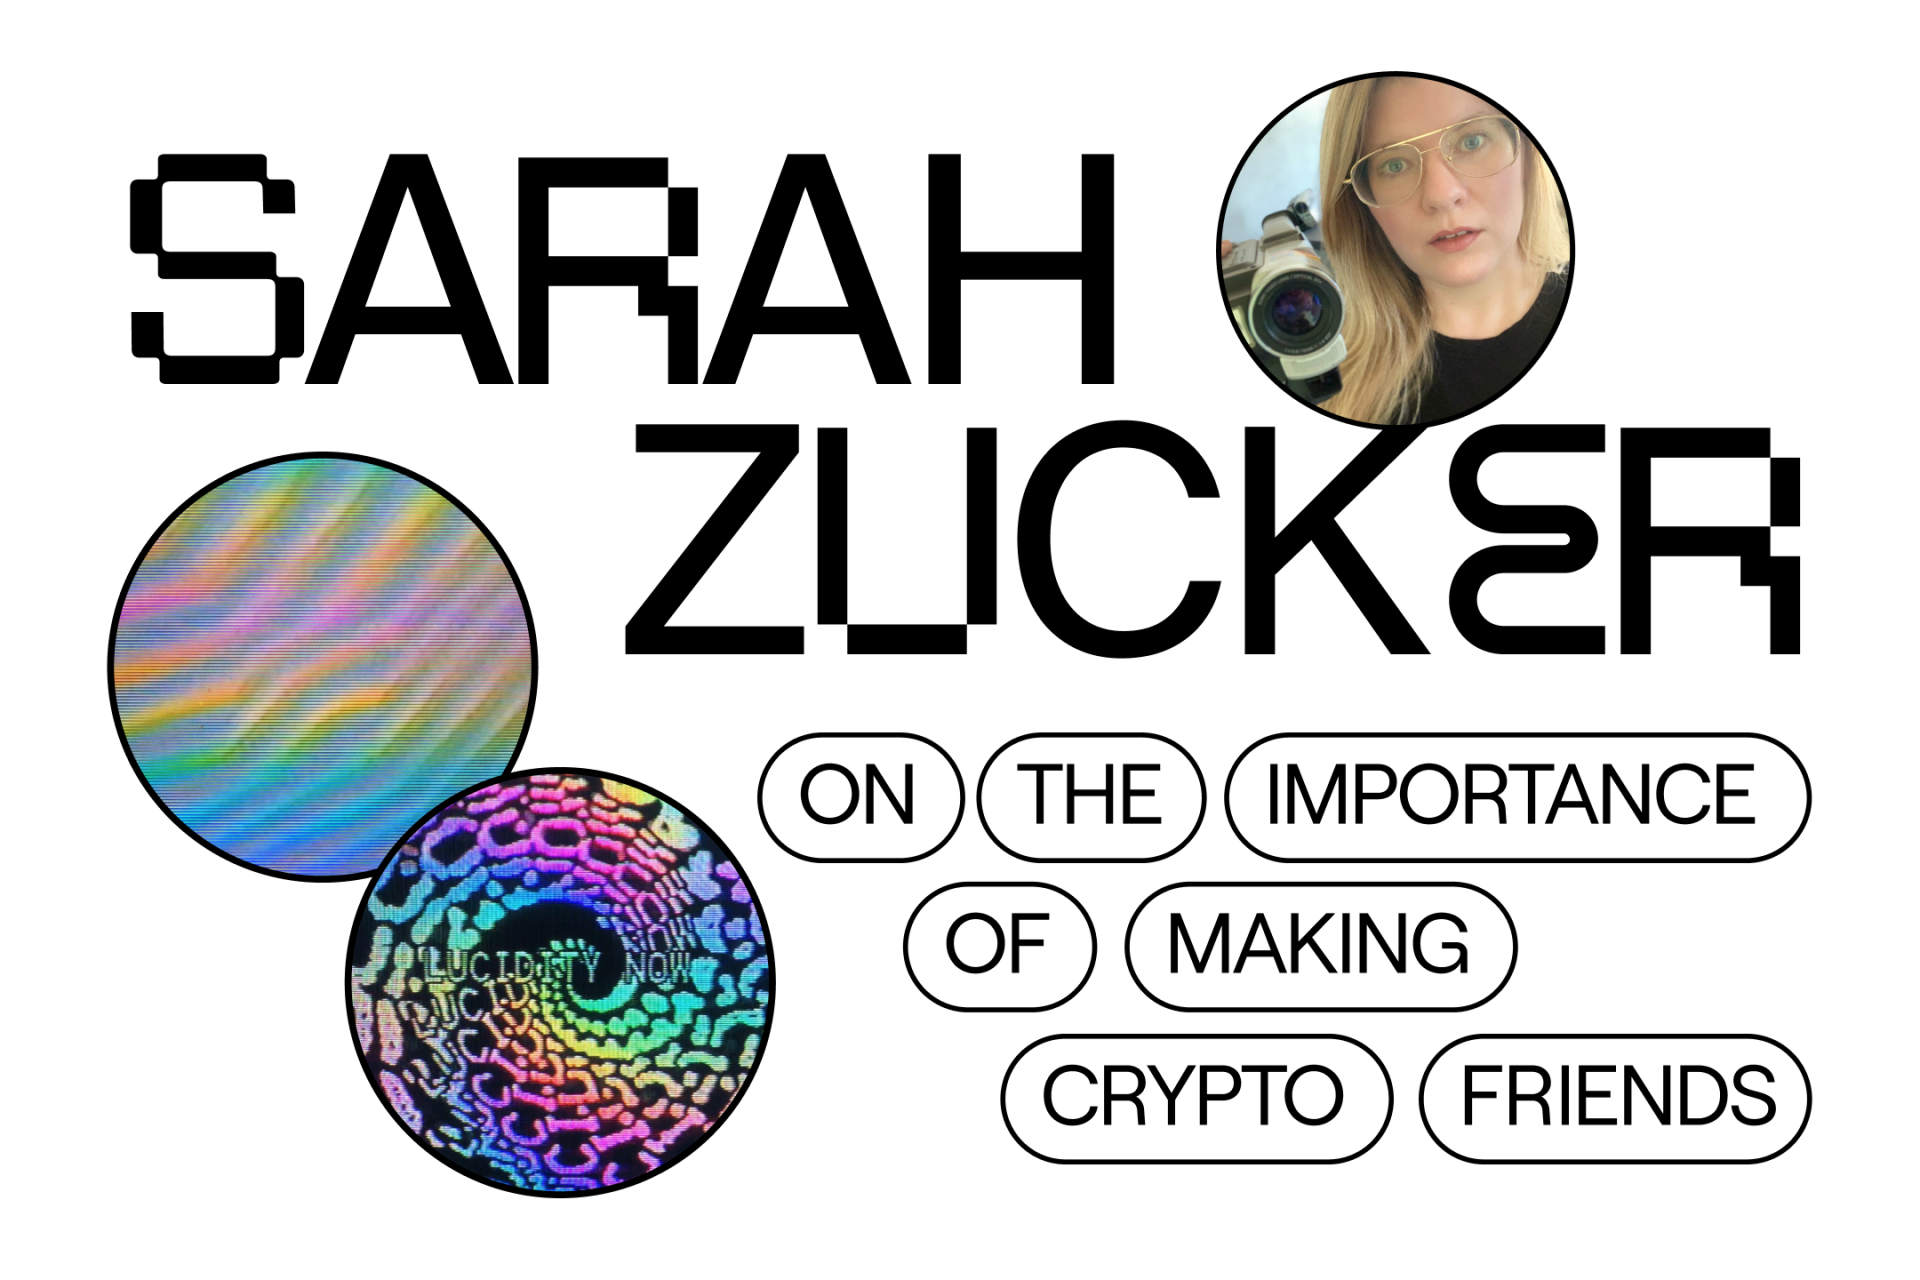 Sarah Zucker on the importance of making crypto friends.